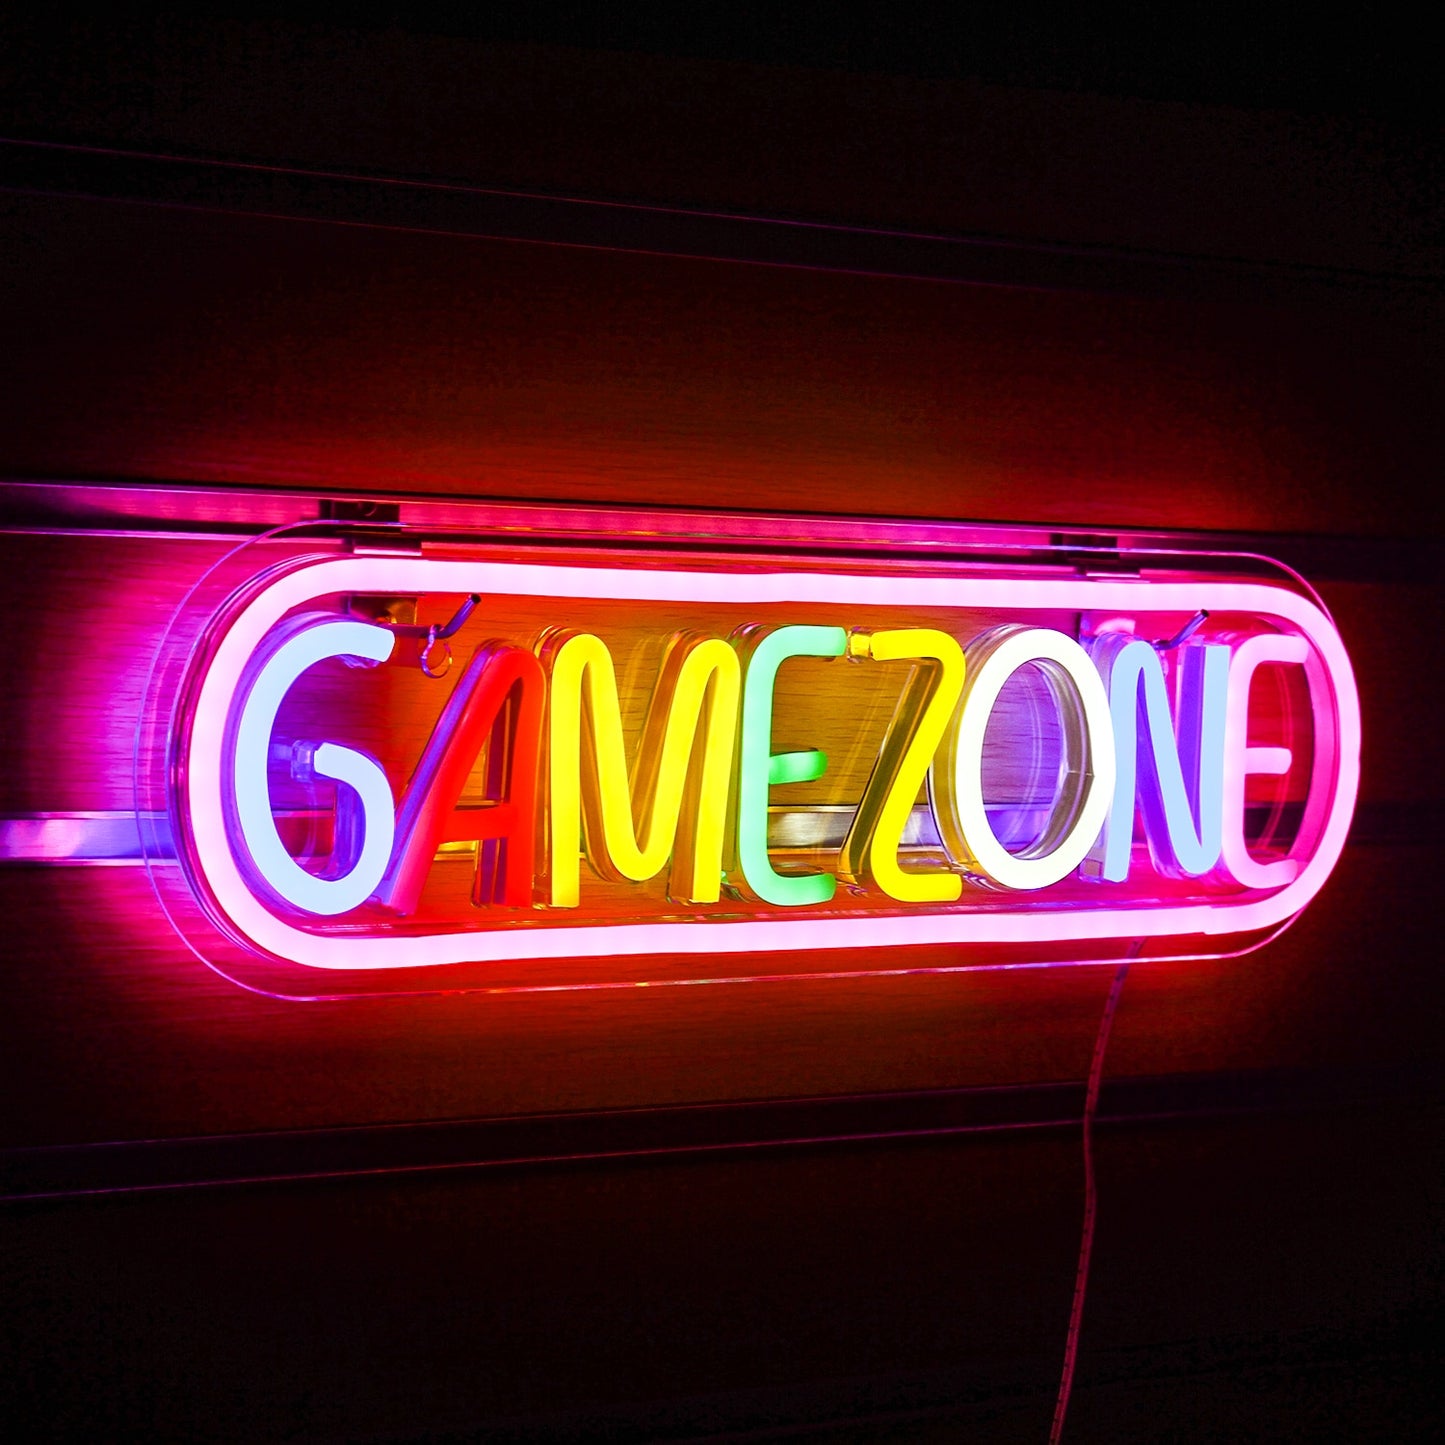 Game Zone Neon Sign